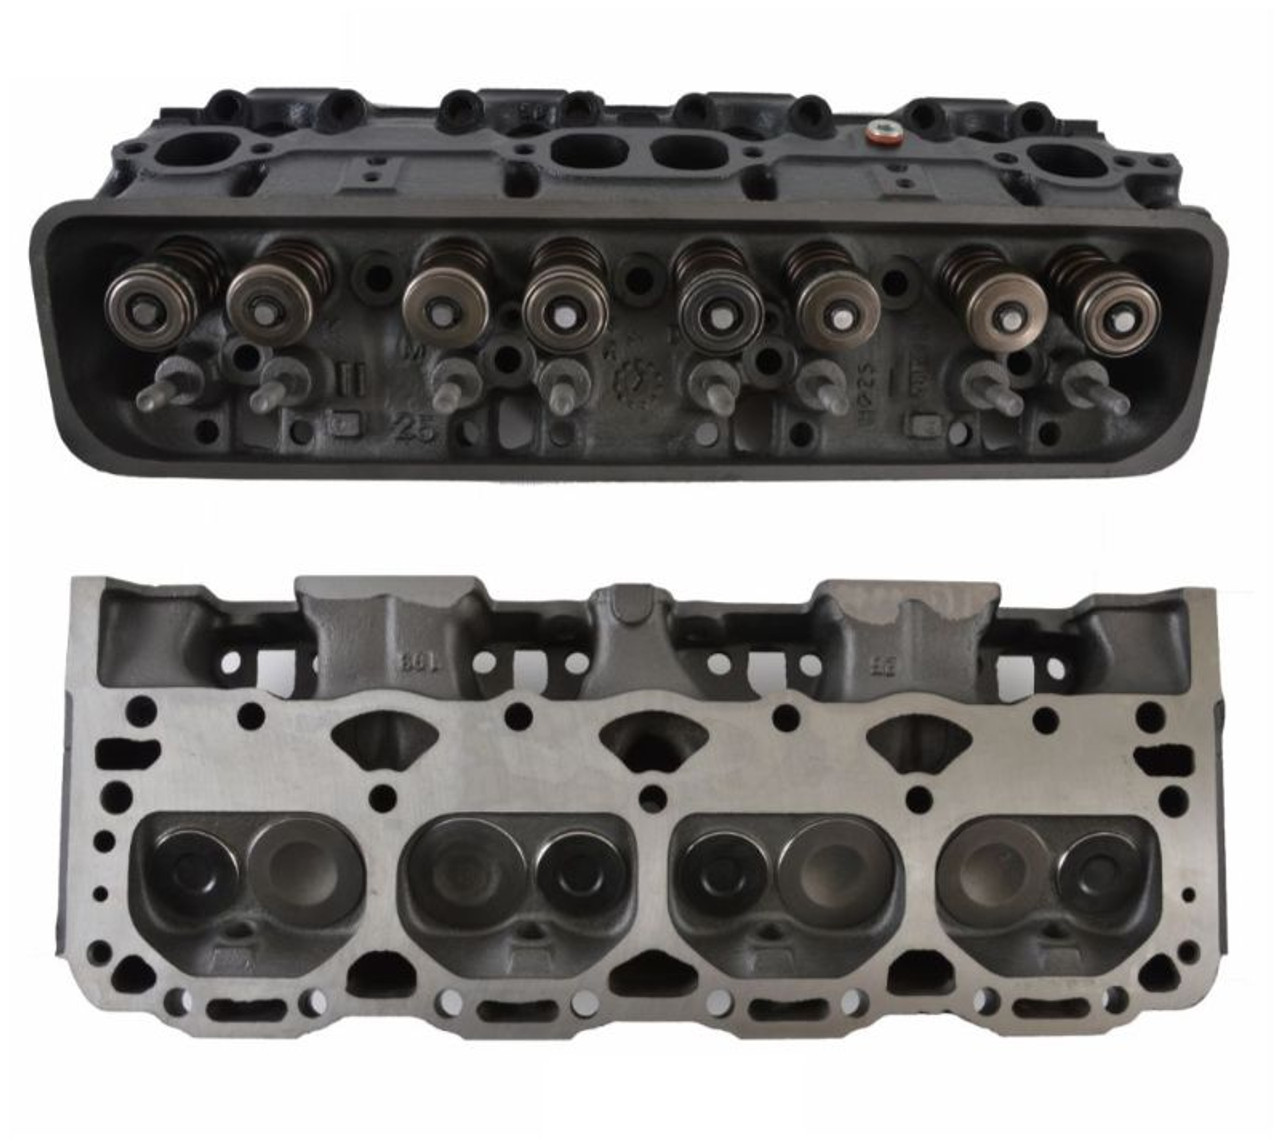 Cylinder Head Assembly - 1994 Chevrolet P30 5.7L (CH1065R.K249)